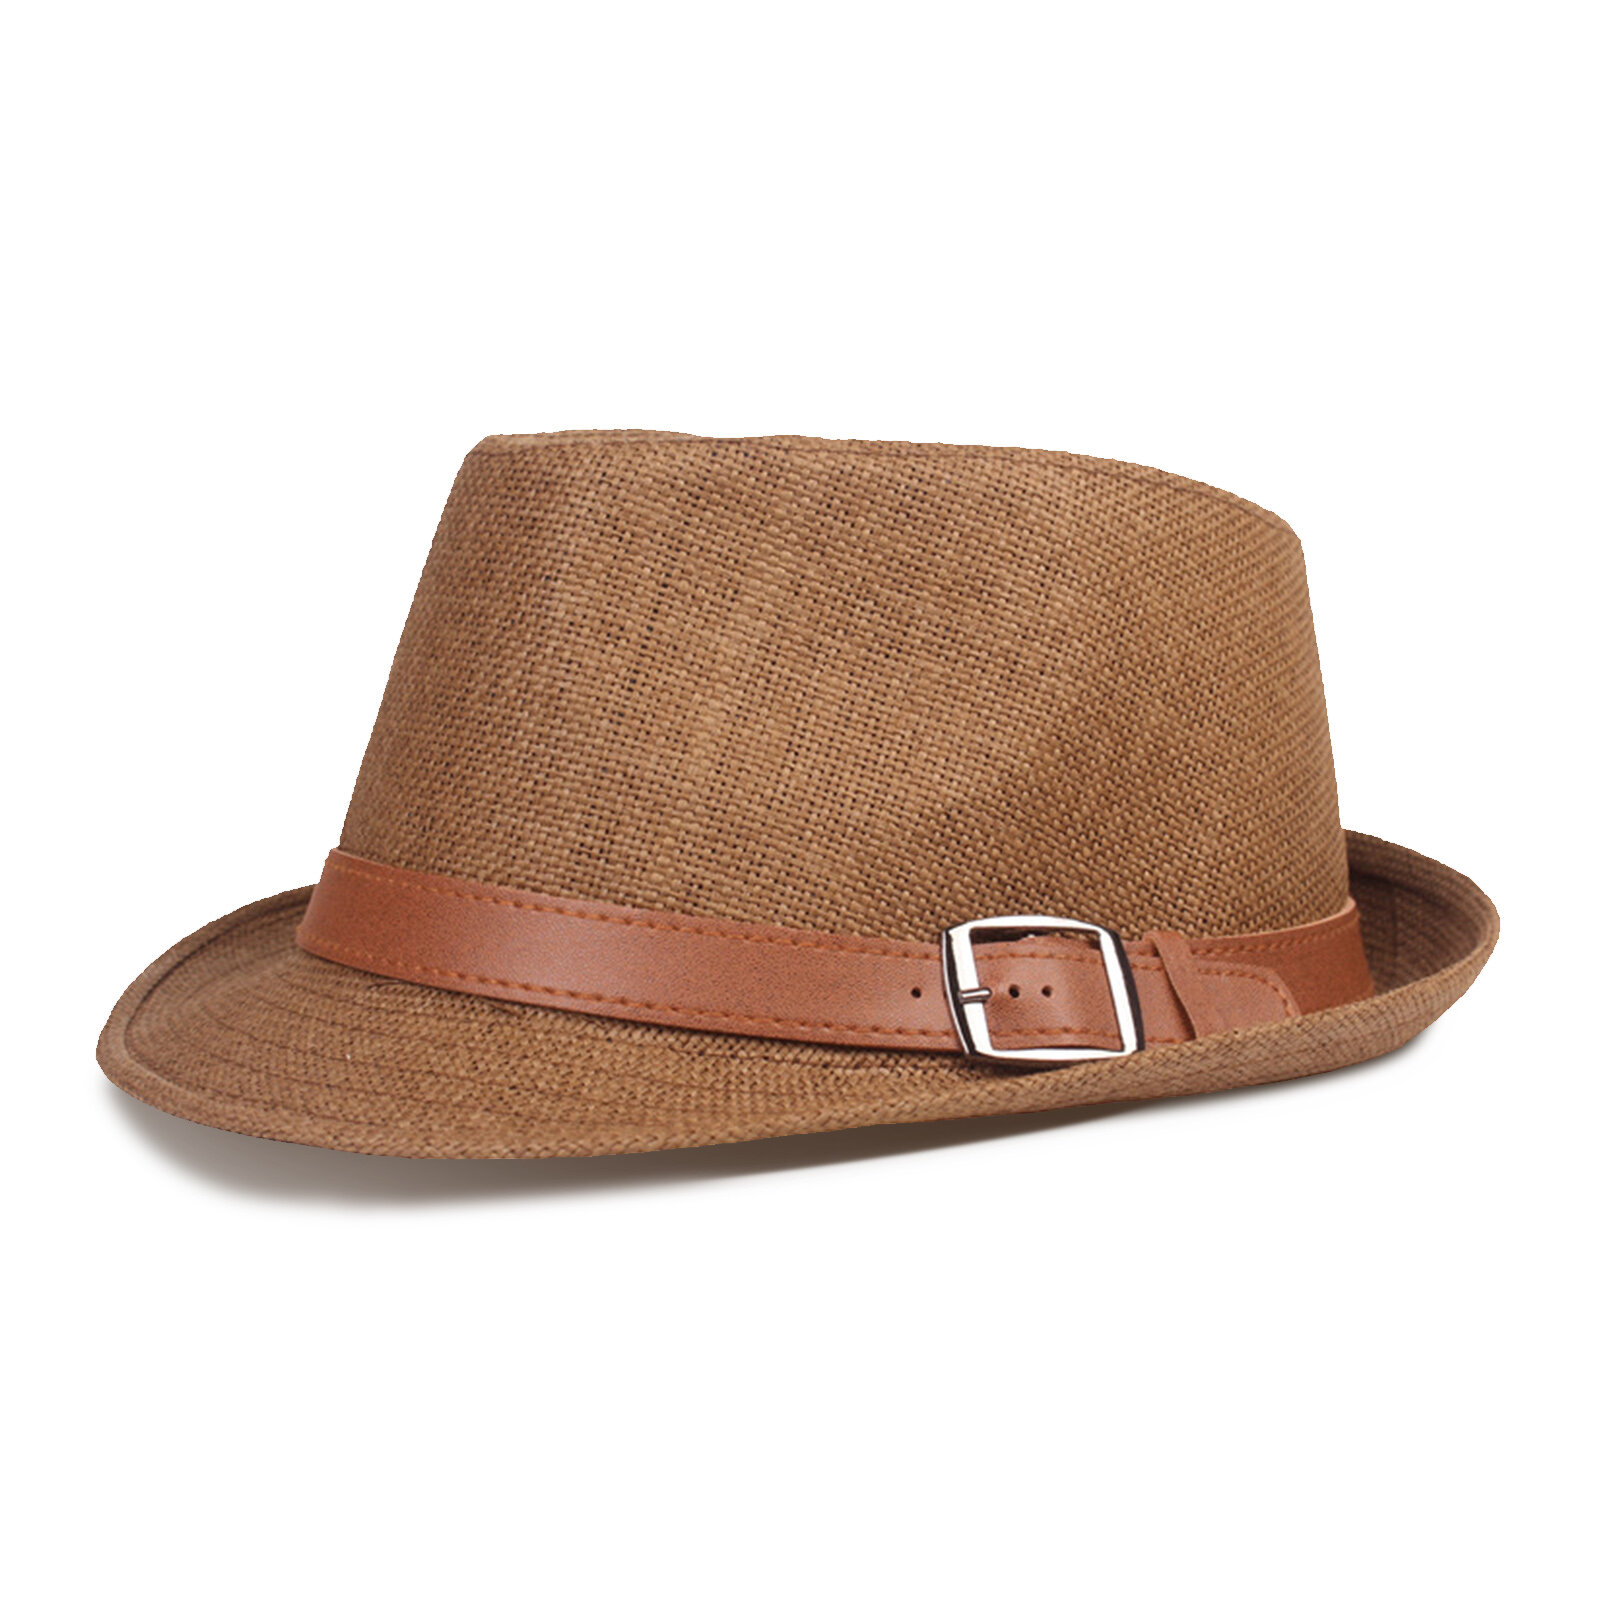 Men Straw Casual Vintage All-match Breathable Sunshade Top Hats Flat Hats